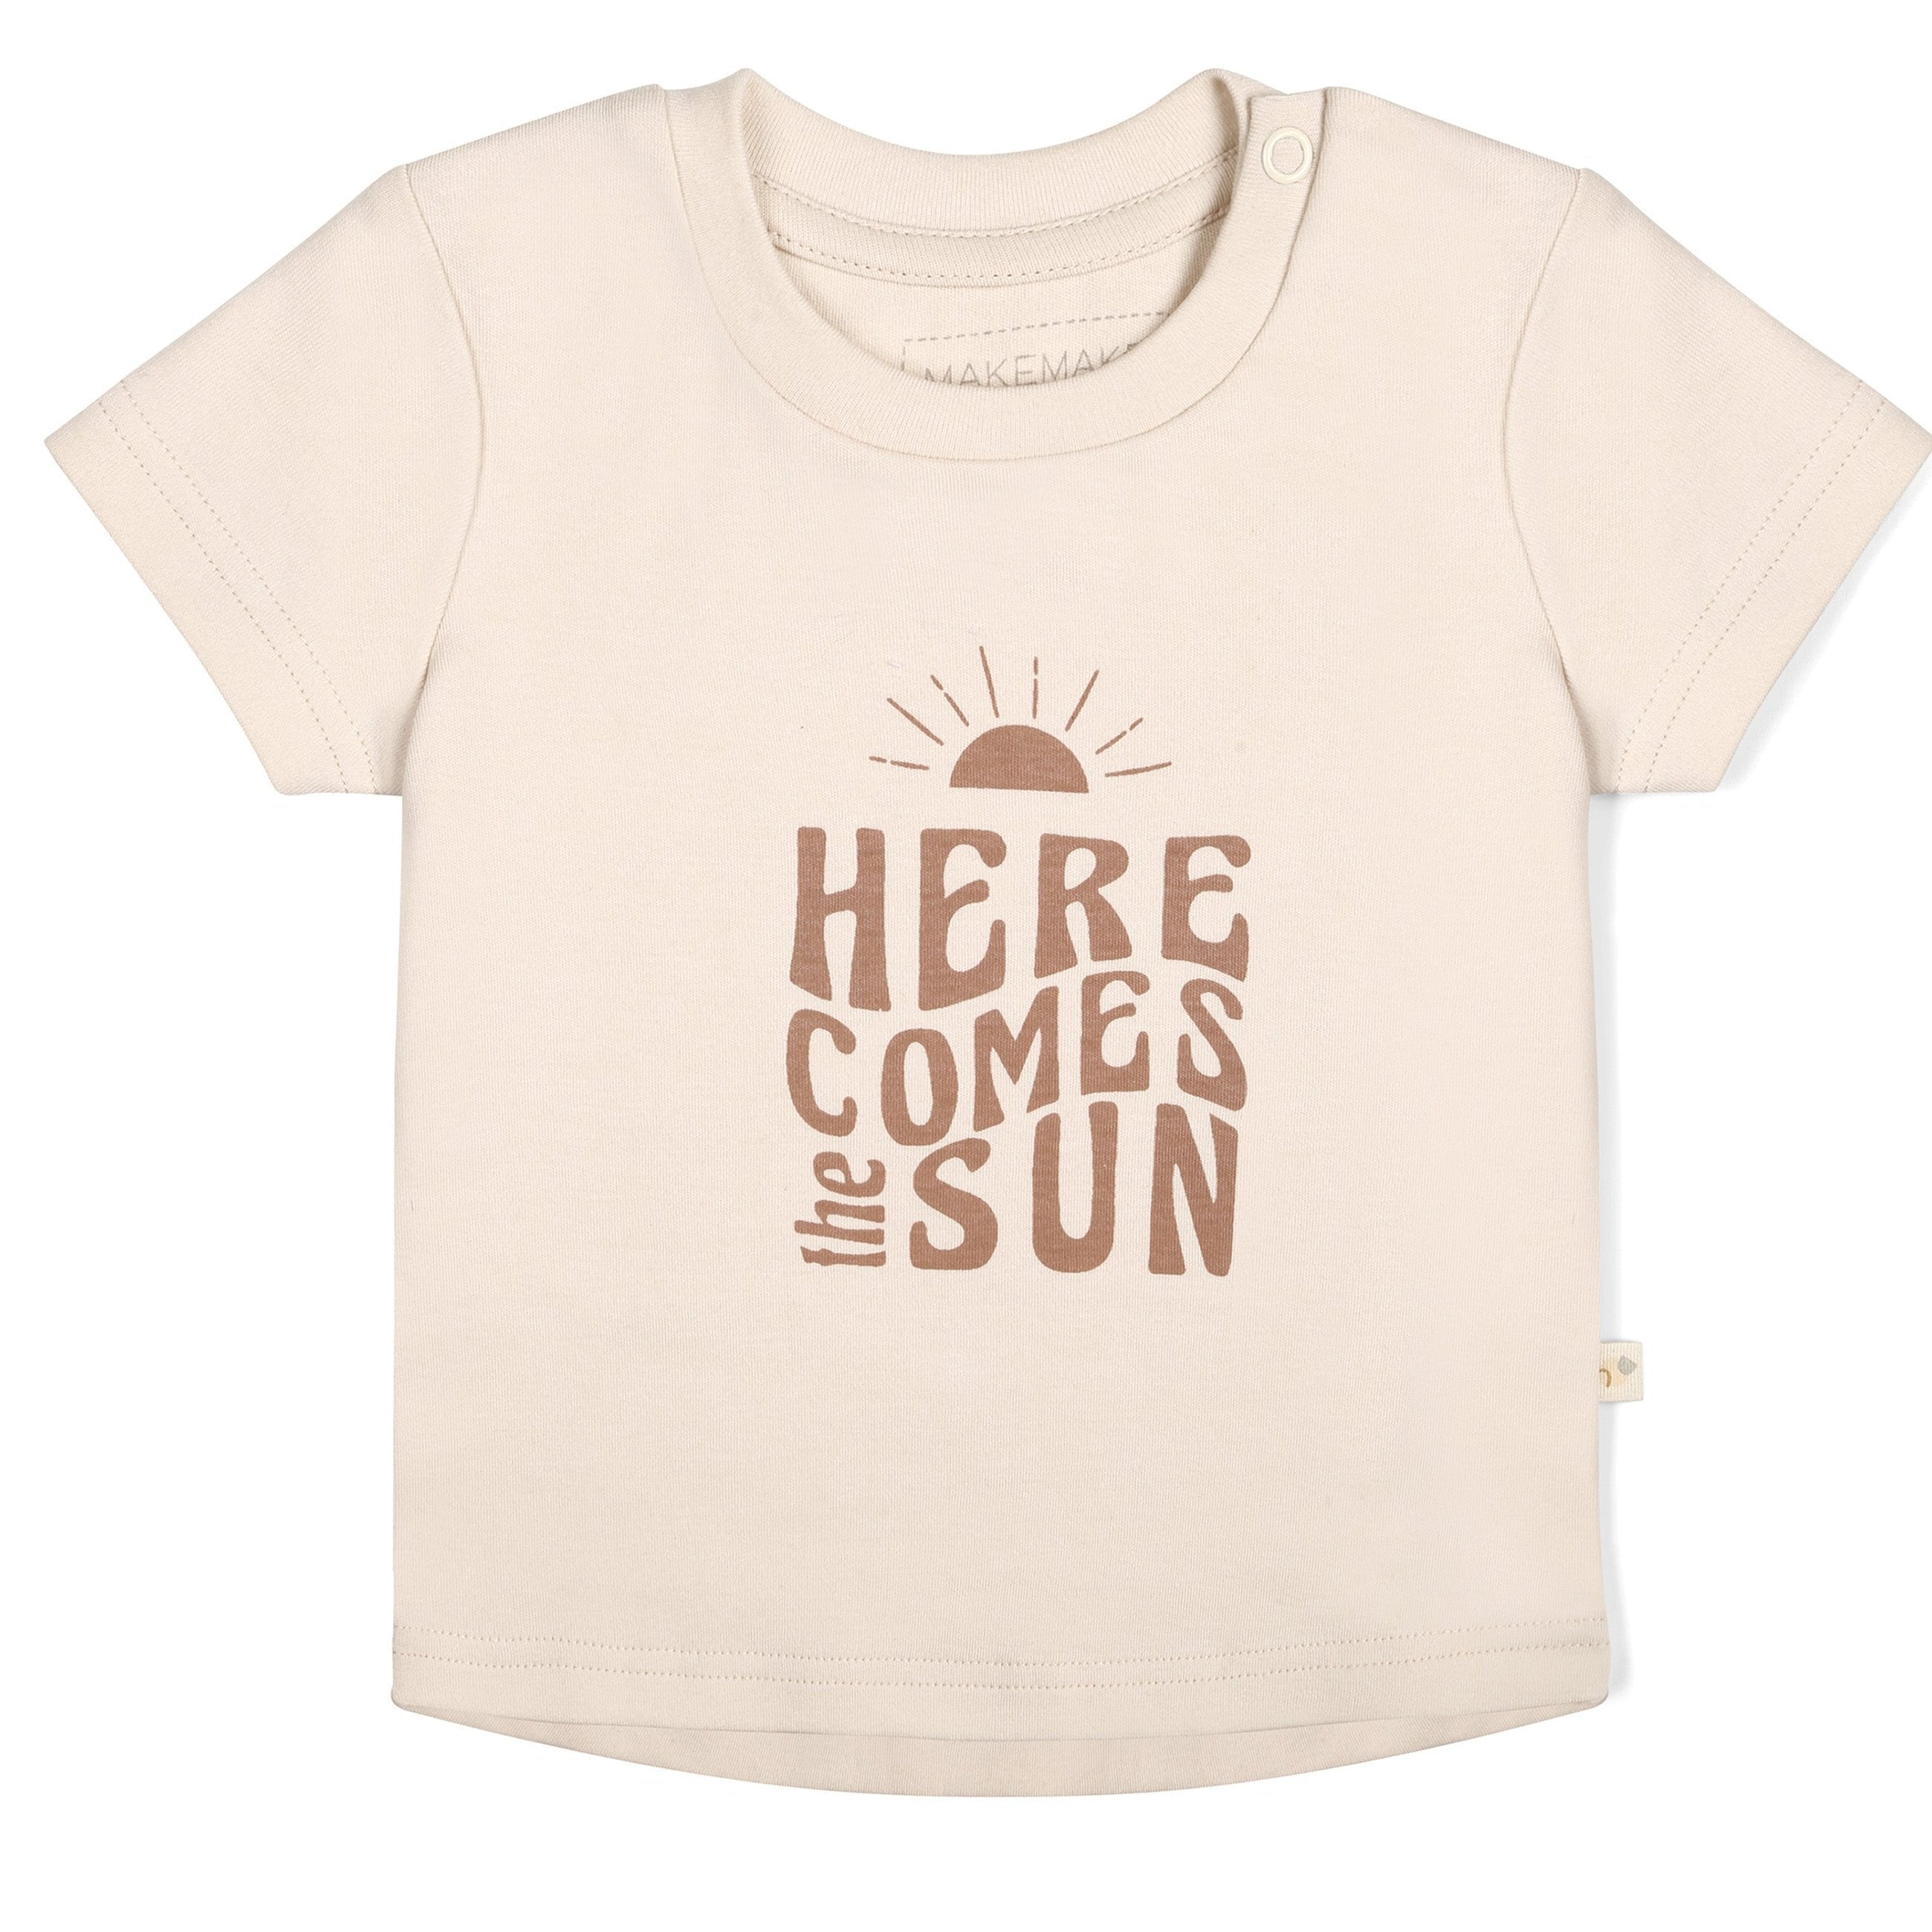 A cream-colored toddler Organic Crew Neck Tee - Here Comes The Sun from Makemake Organics, with the phrase "here comes the sun" printed in brown letters, featuring a graphic of a rising sun above the text.